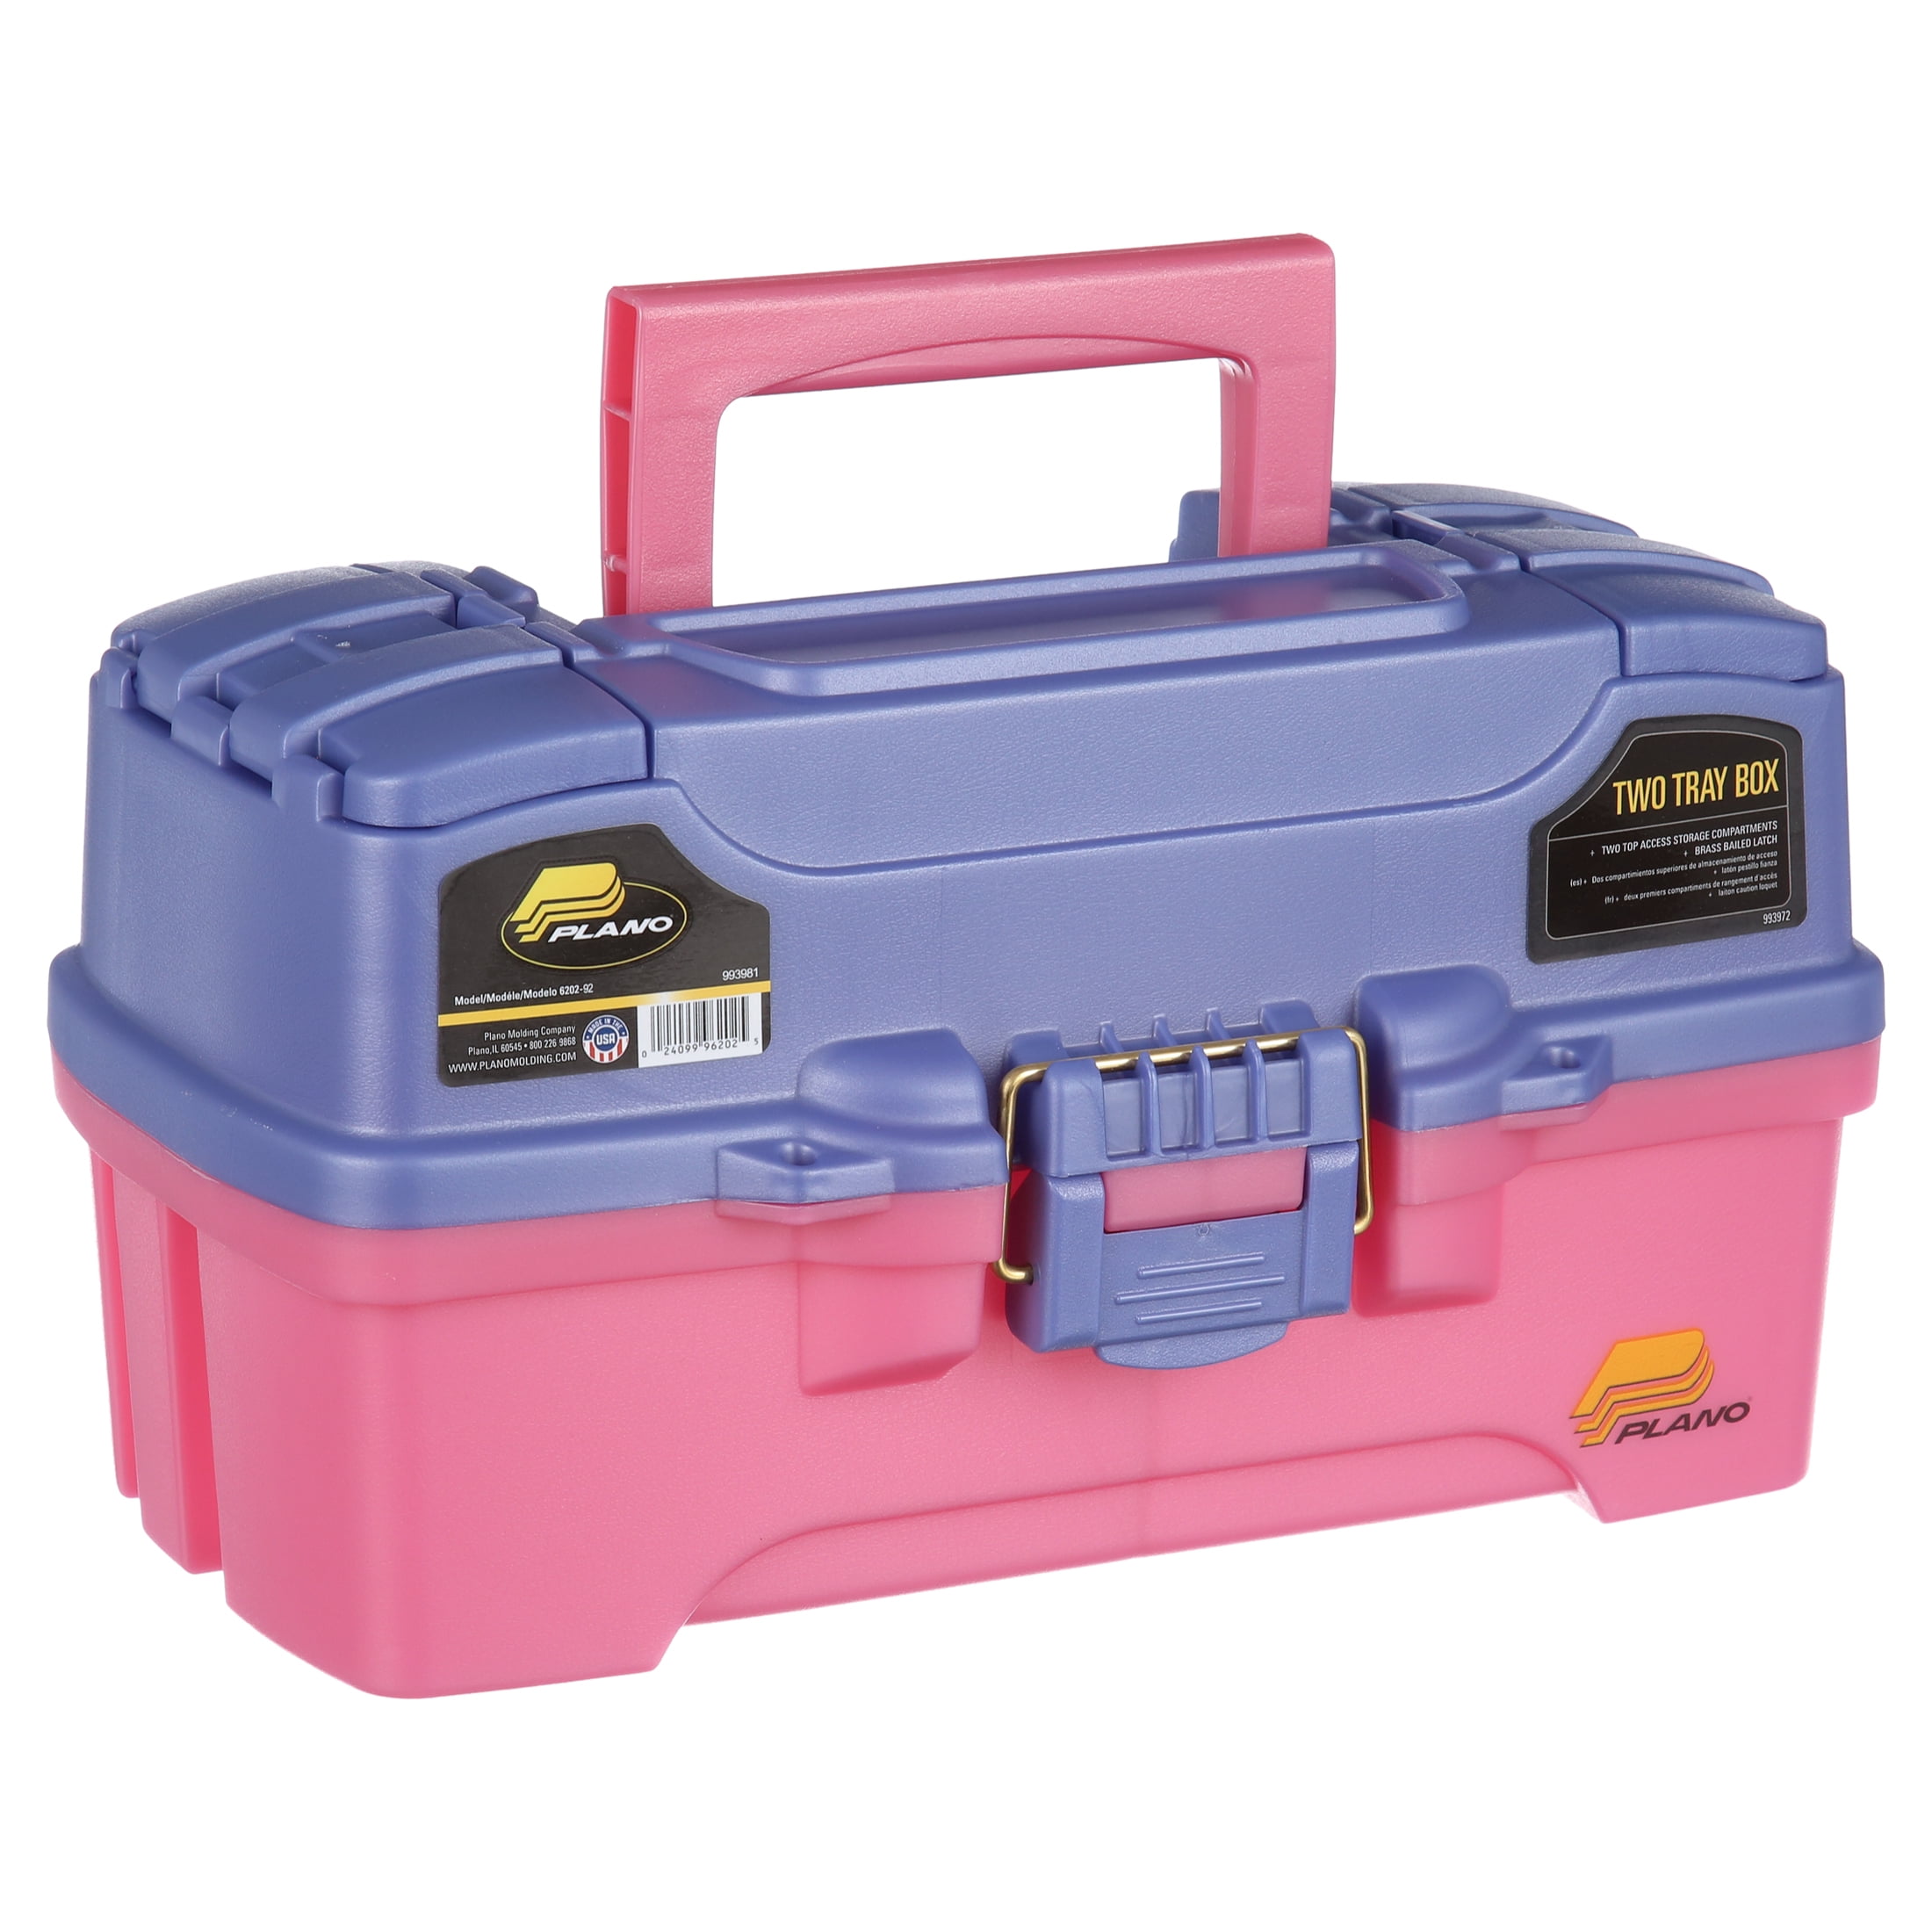 Plano Two Tray Fishing Tackle Box - Model: 6202-92 - Pink/Periwinkle